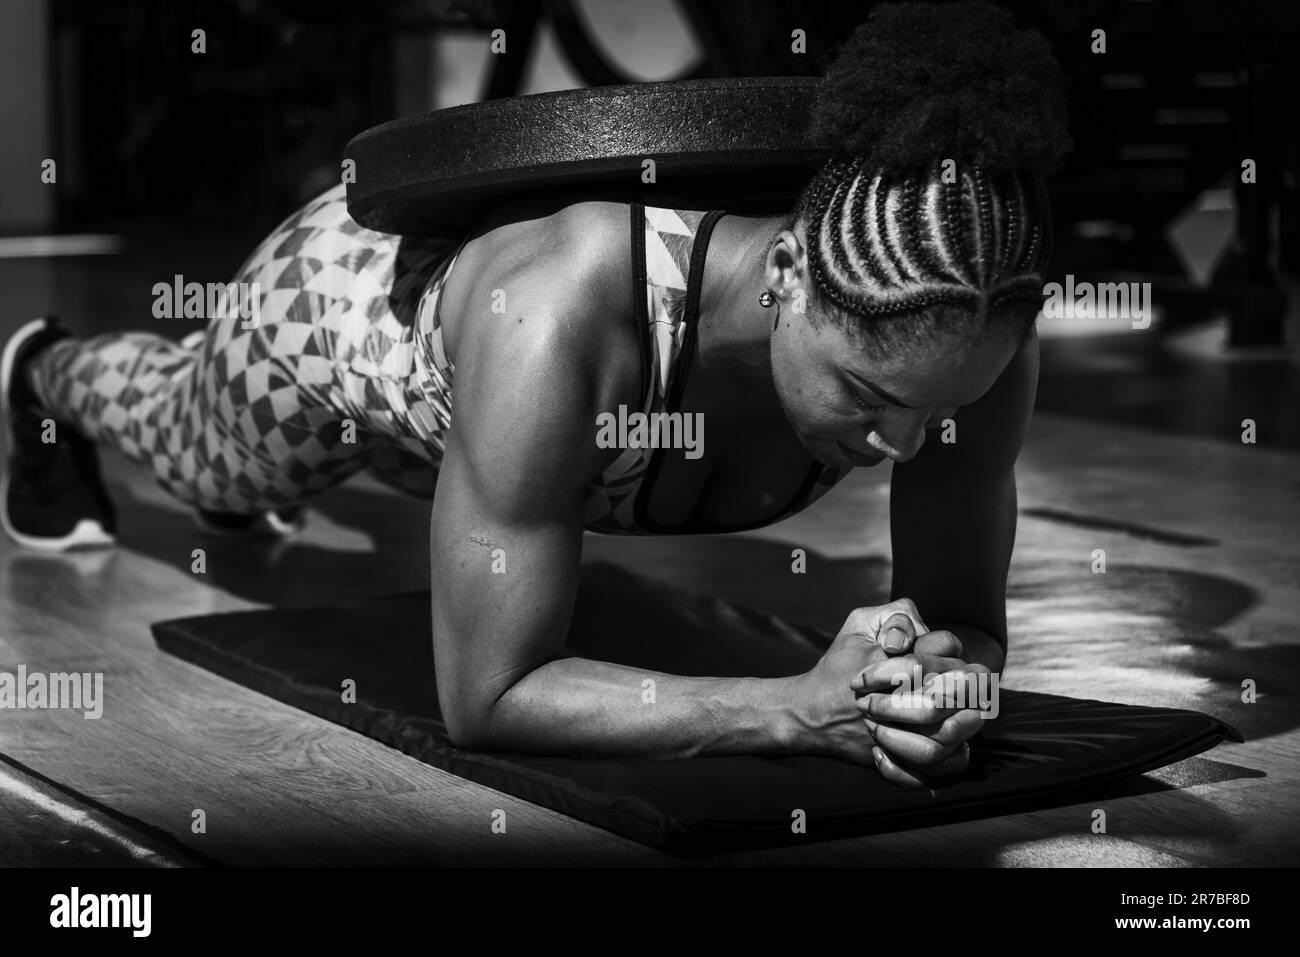 An Athletic Female Fitness Enthusiast Engaging In A Weighted Planking Exercise Demonstrating